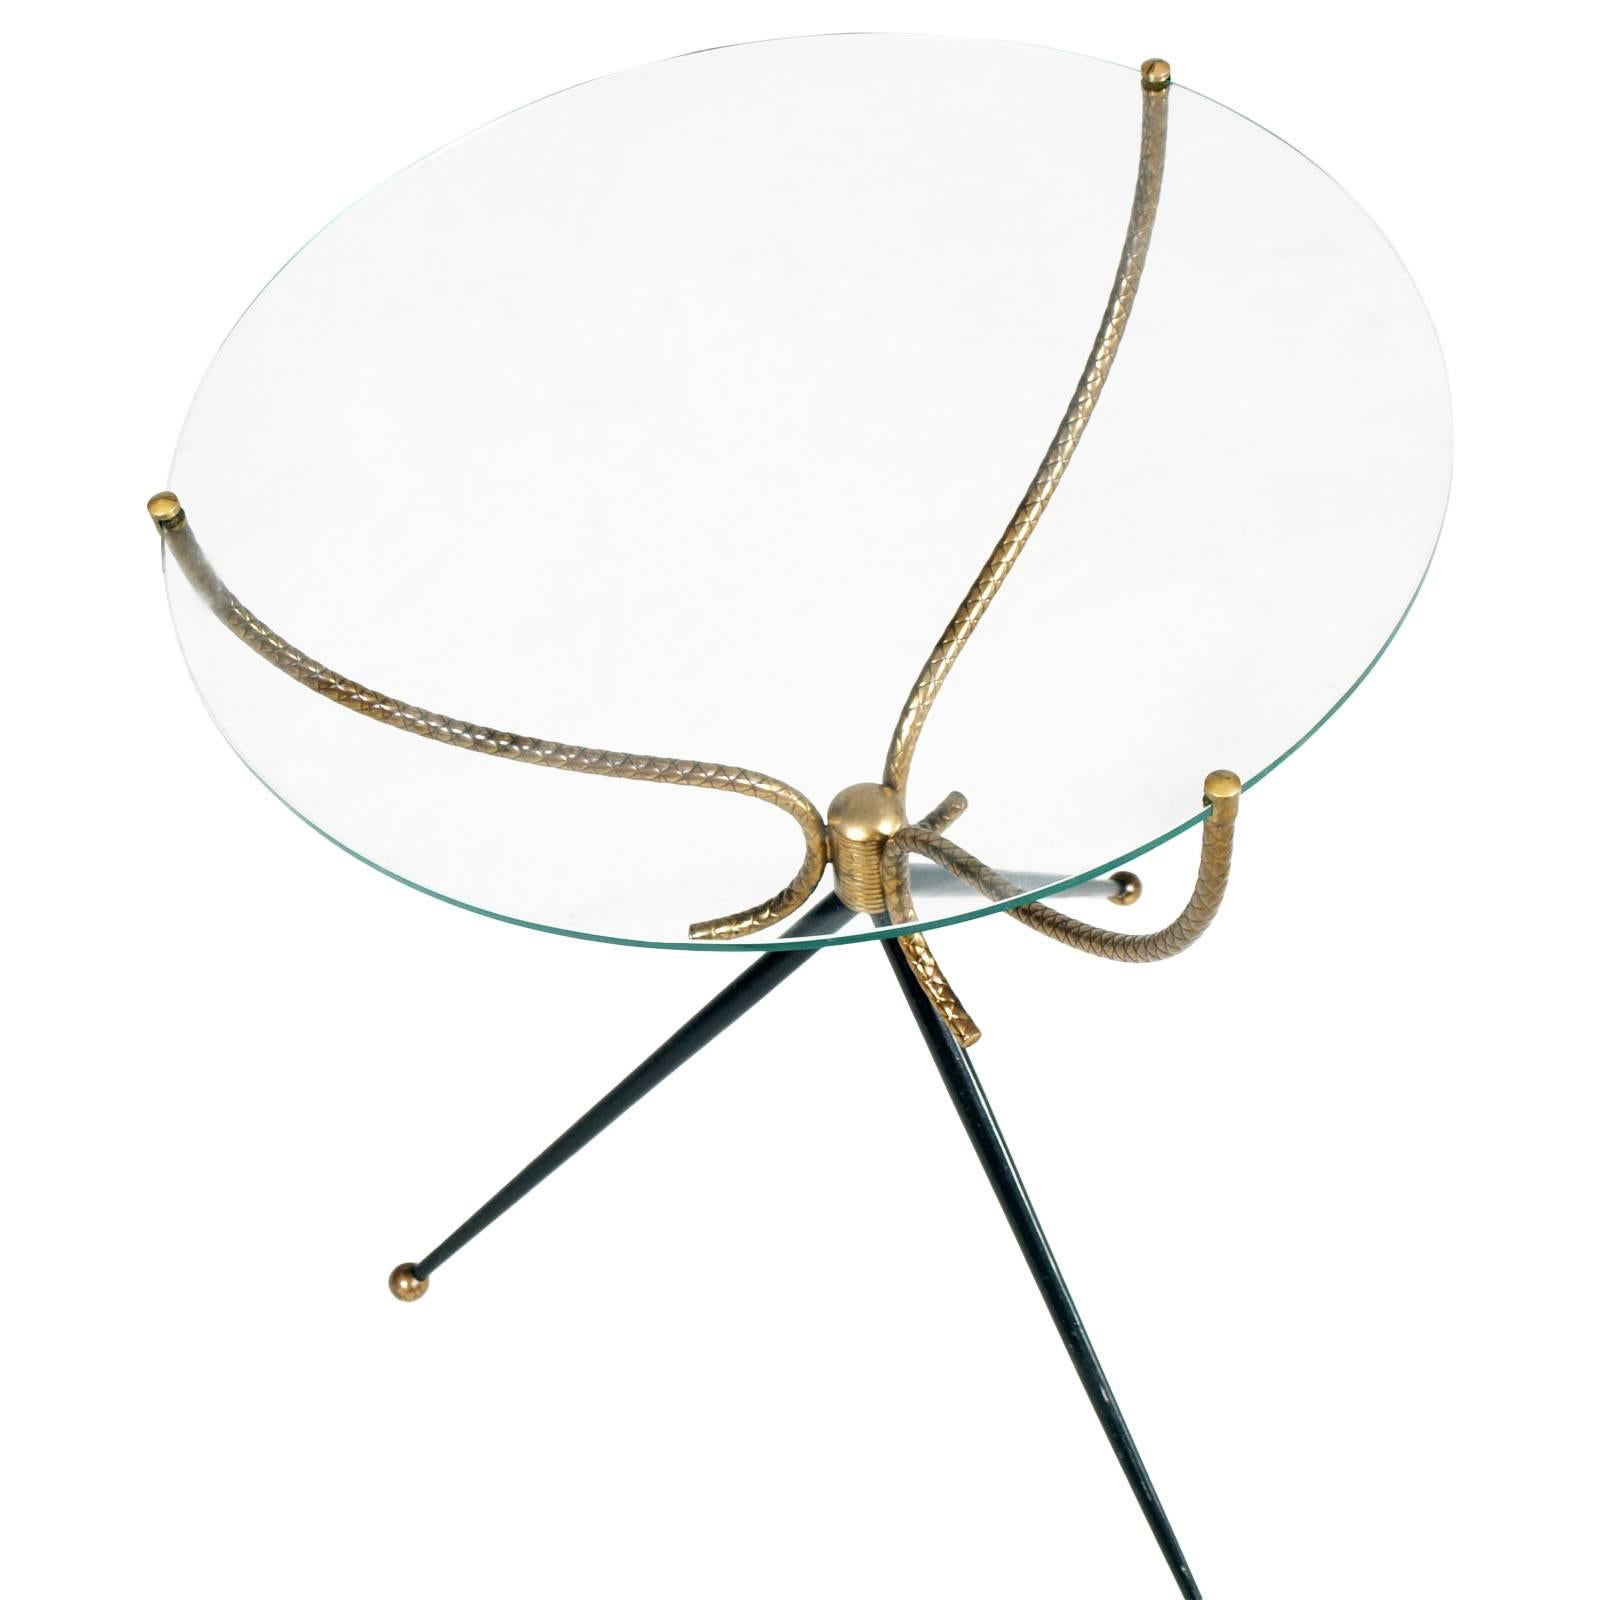 Italian very rare 1930s Gio Ponti style tripod coffee table, gilt and lacquered brass, crystal top
Measures cm: height 53, diameter 43.